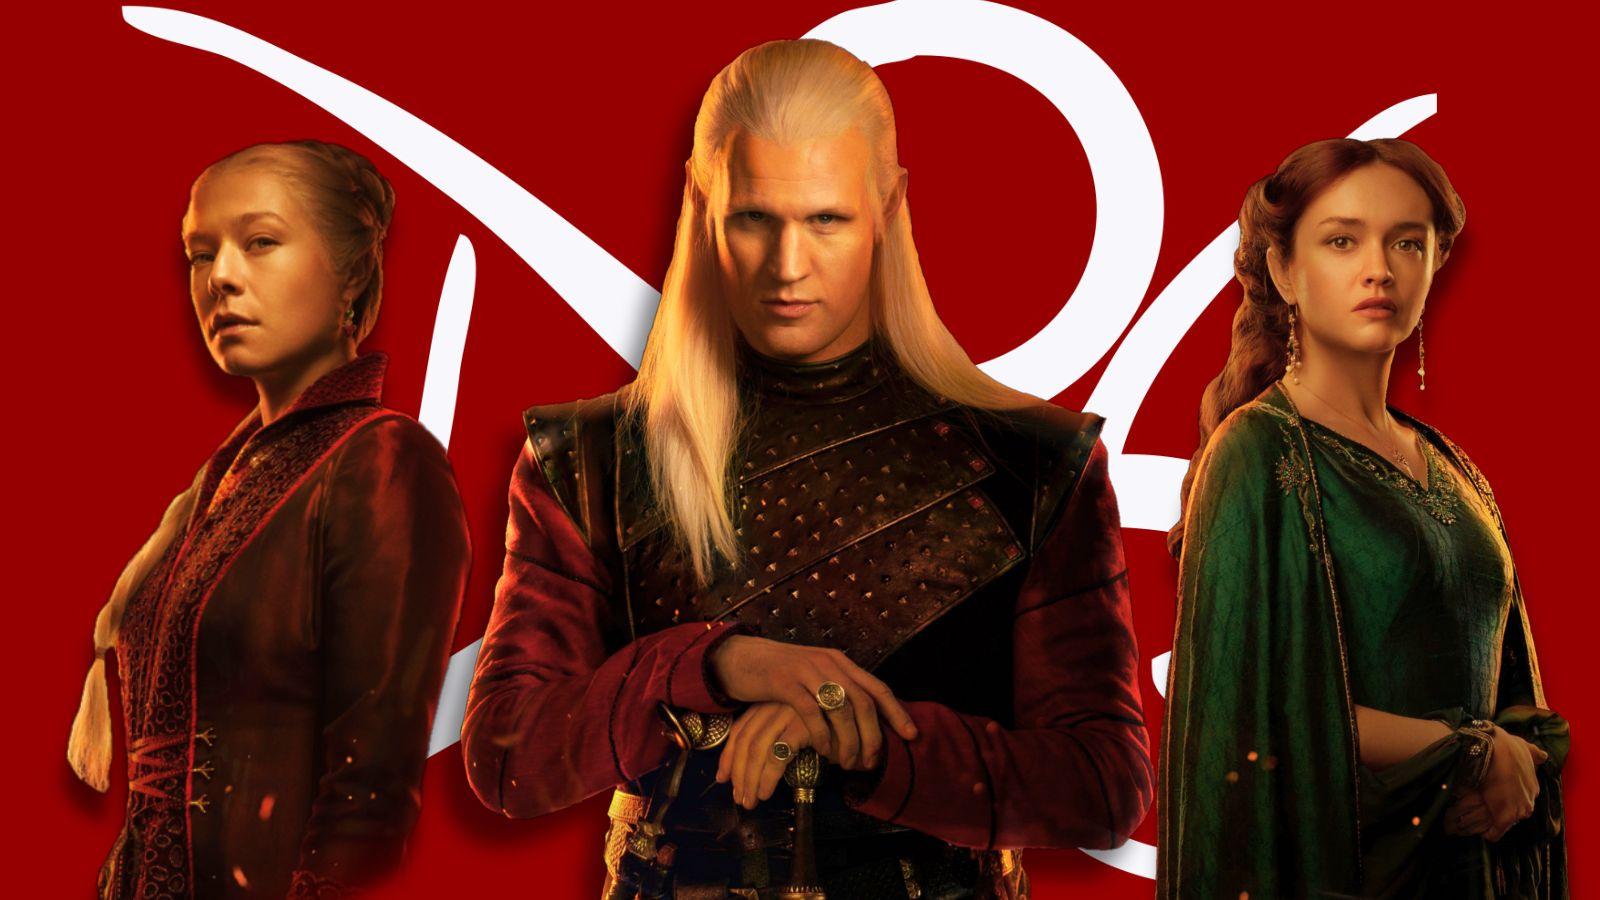 Daemon, Rhaenyra, and Alicent in front of the AO3 logo.